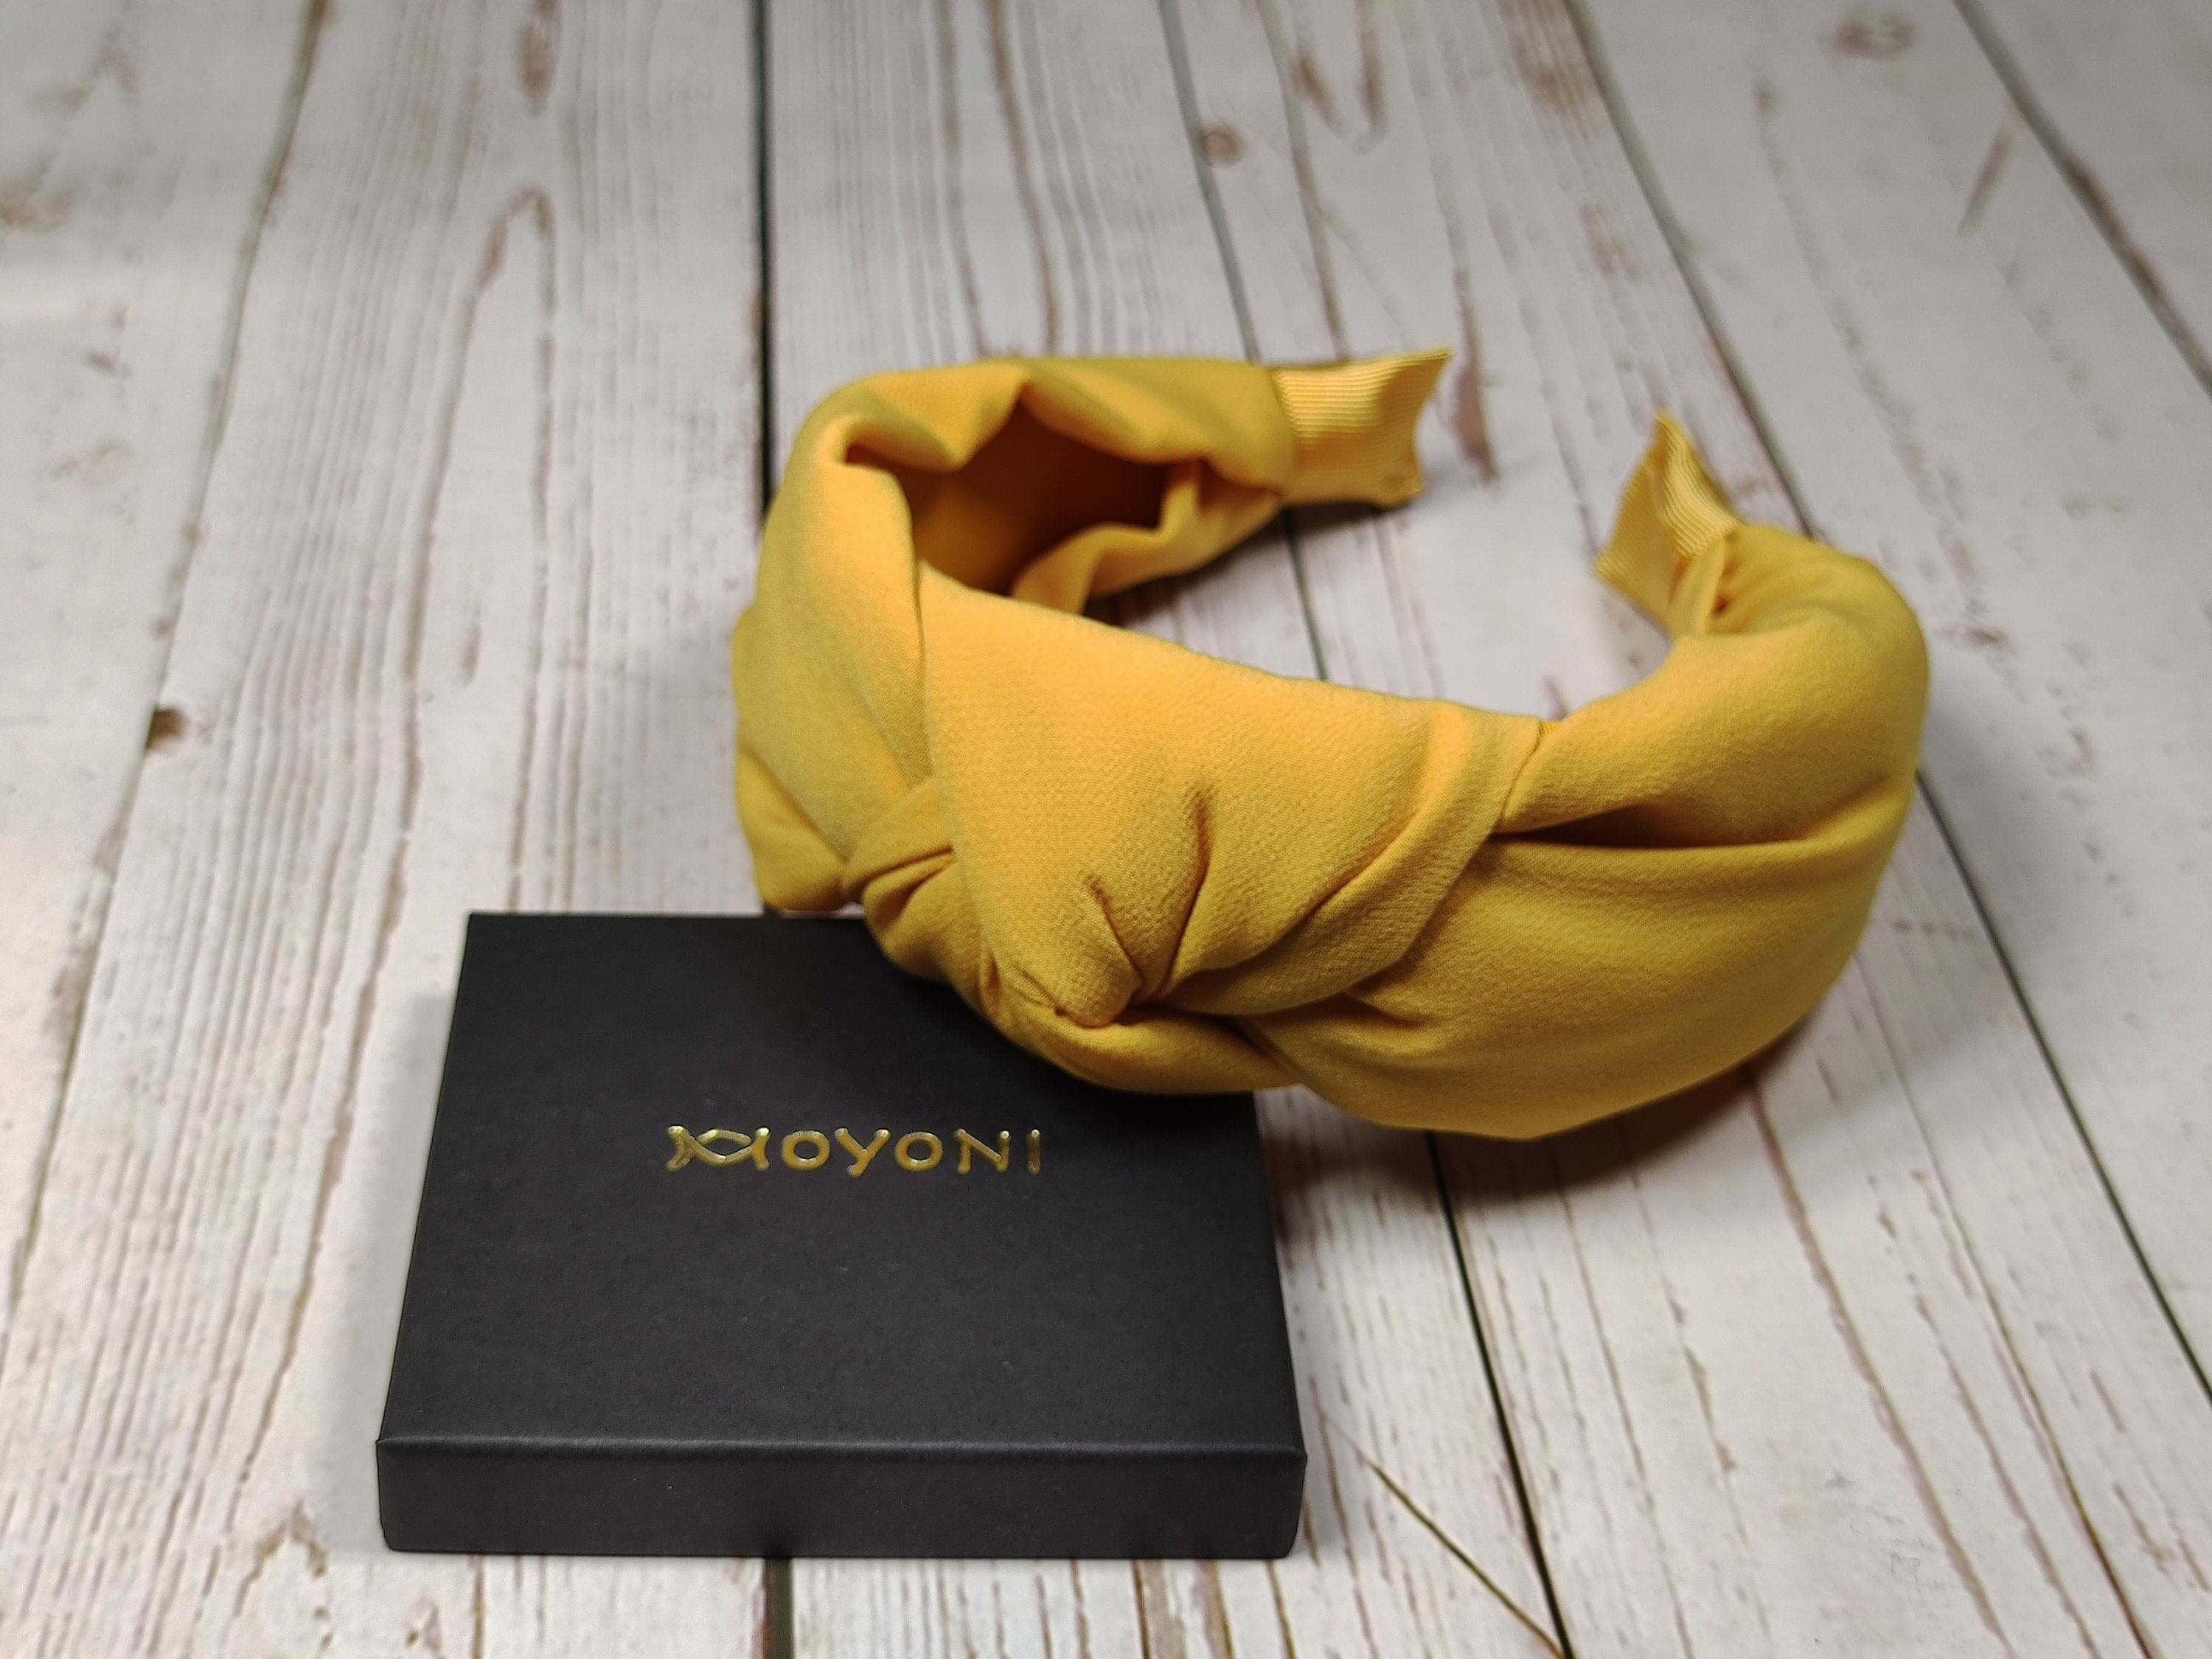 Premium Stylish Lemon Yellow Knotted Headband - Wide Classic Hairband for Women with Light Yellow Viscose Crepe and Padded Design available at Moyoni Design